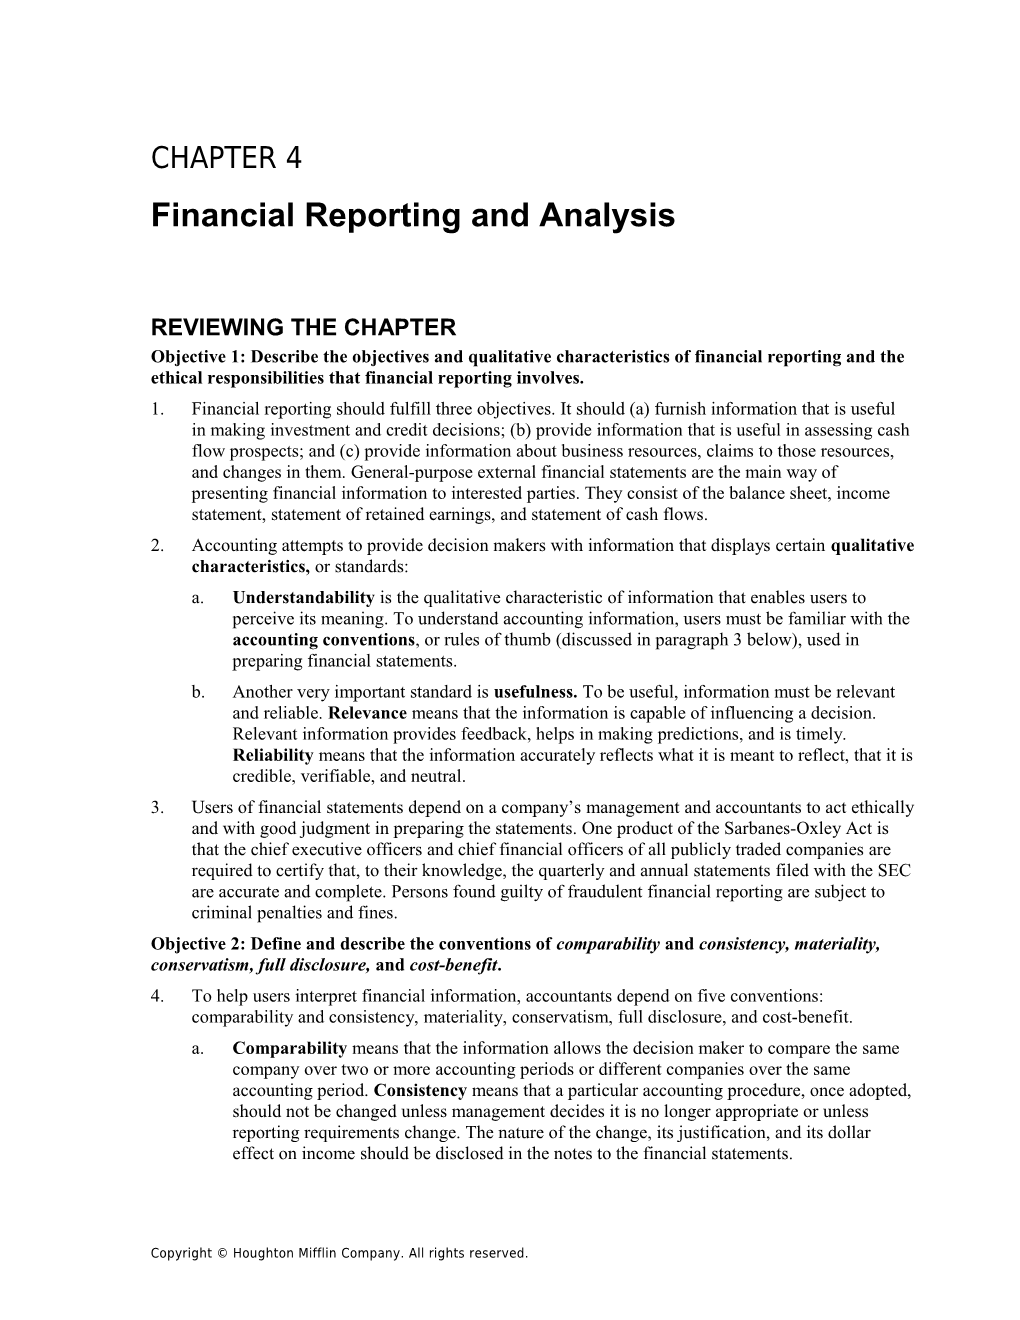 Chapter 4: Financial Reporting and Analysis 5